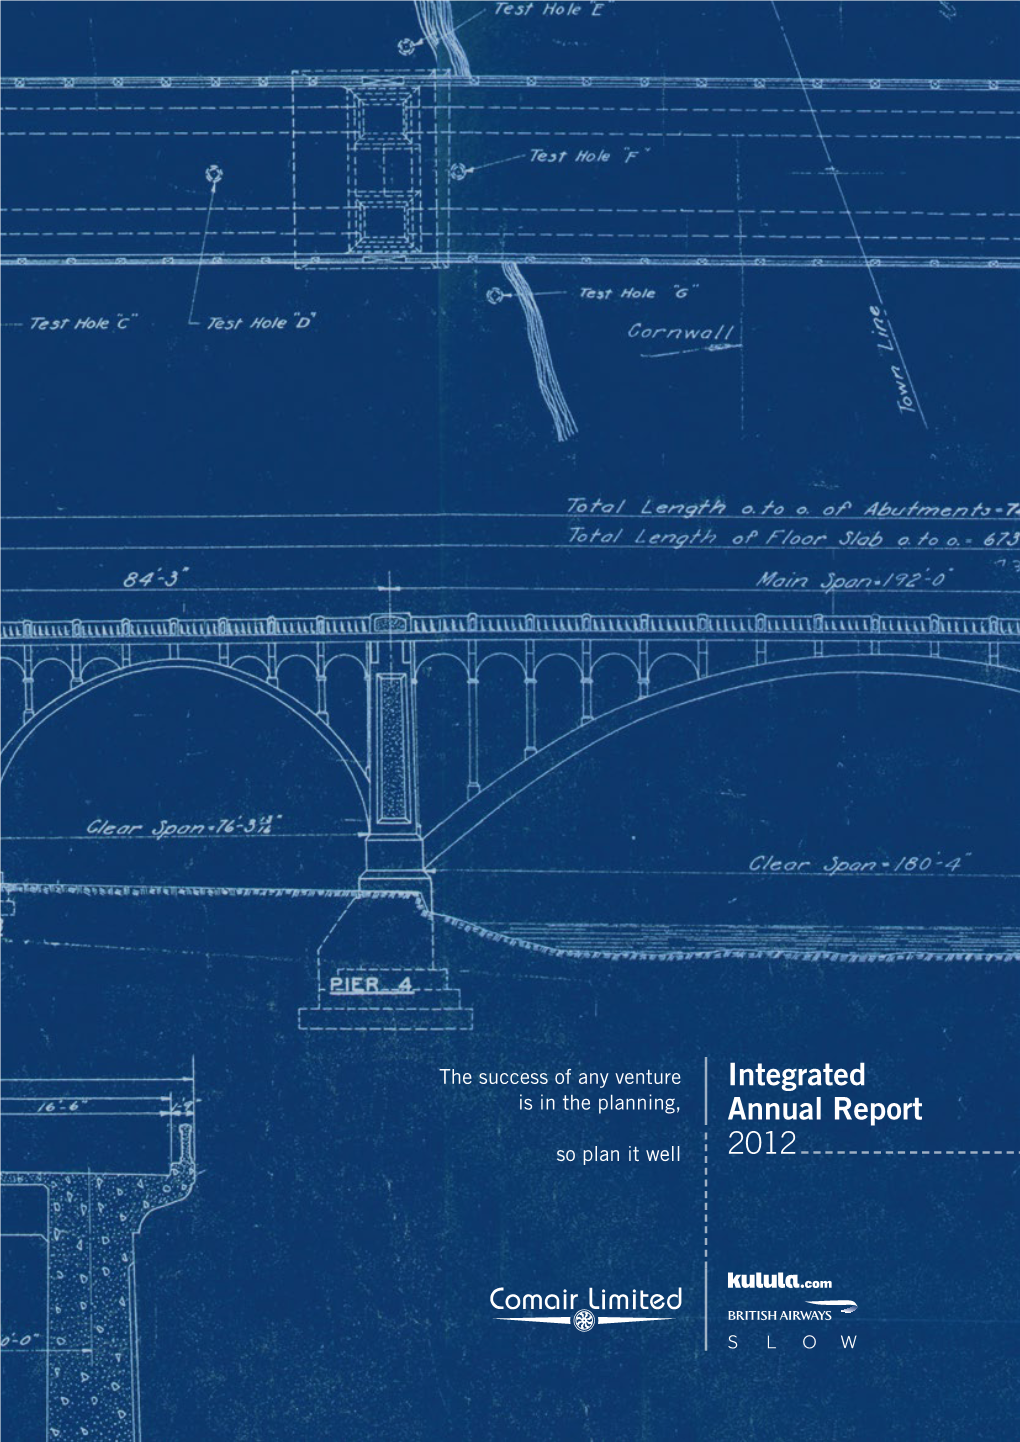 Comair Limited Integrated Annual Report 2012